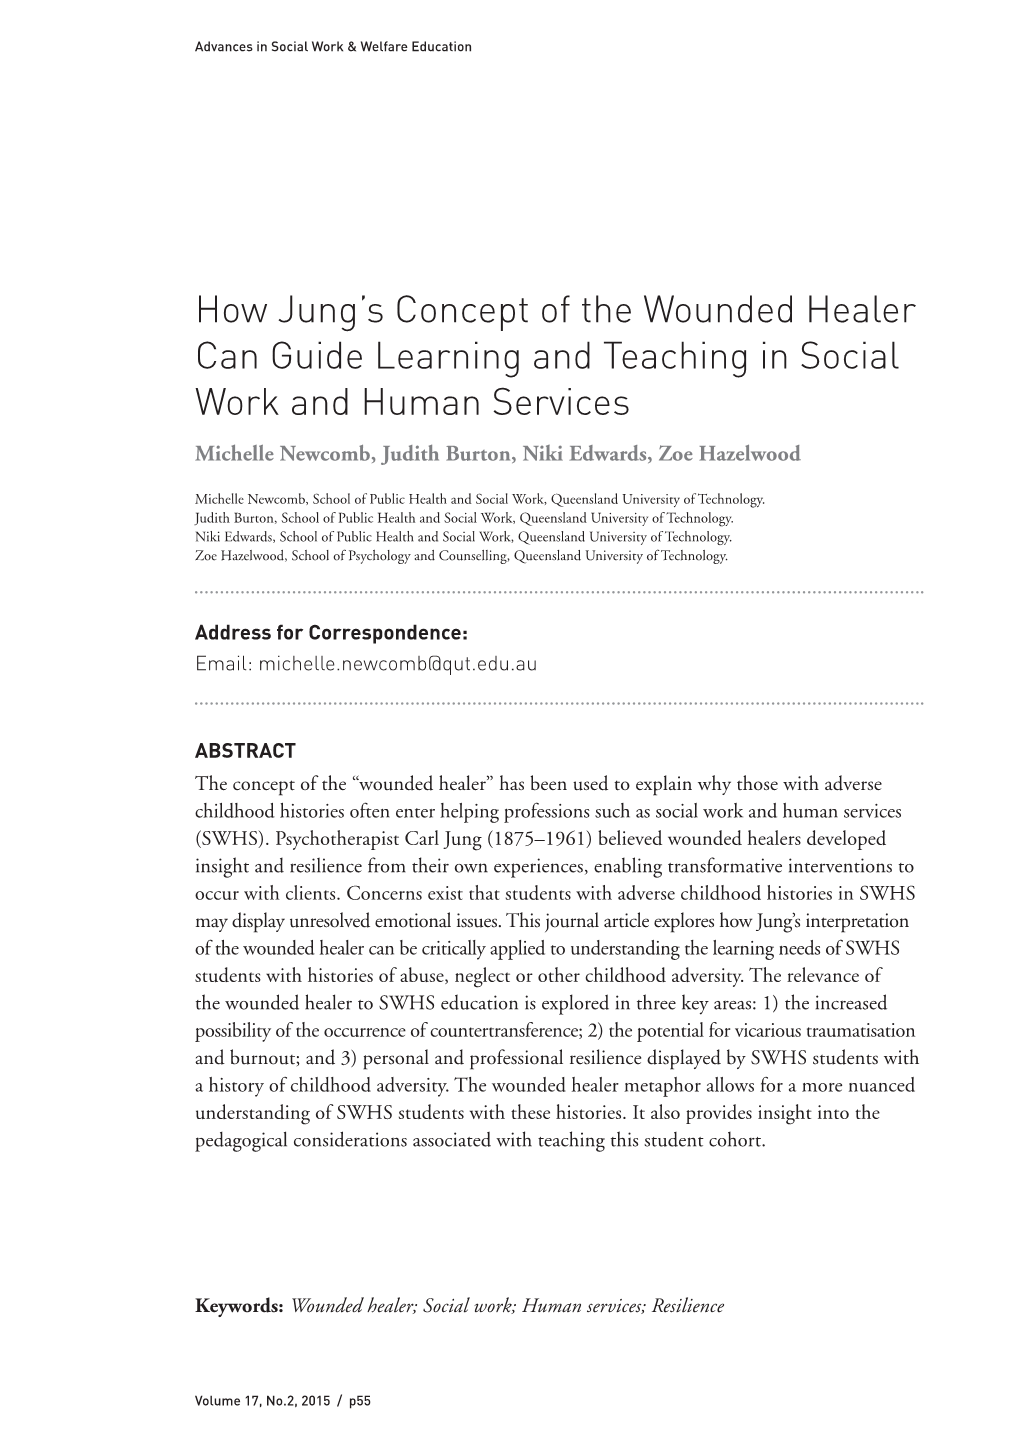 How Jung's Concept of the Wounded Healer Can Guide Learning And